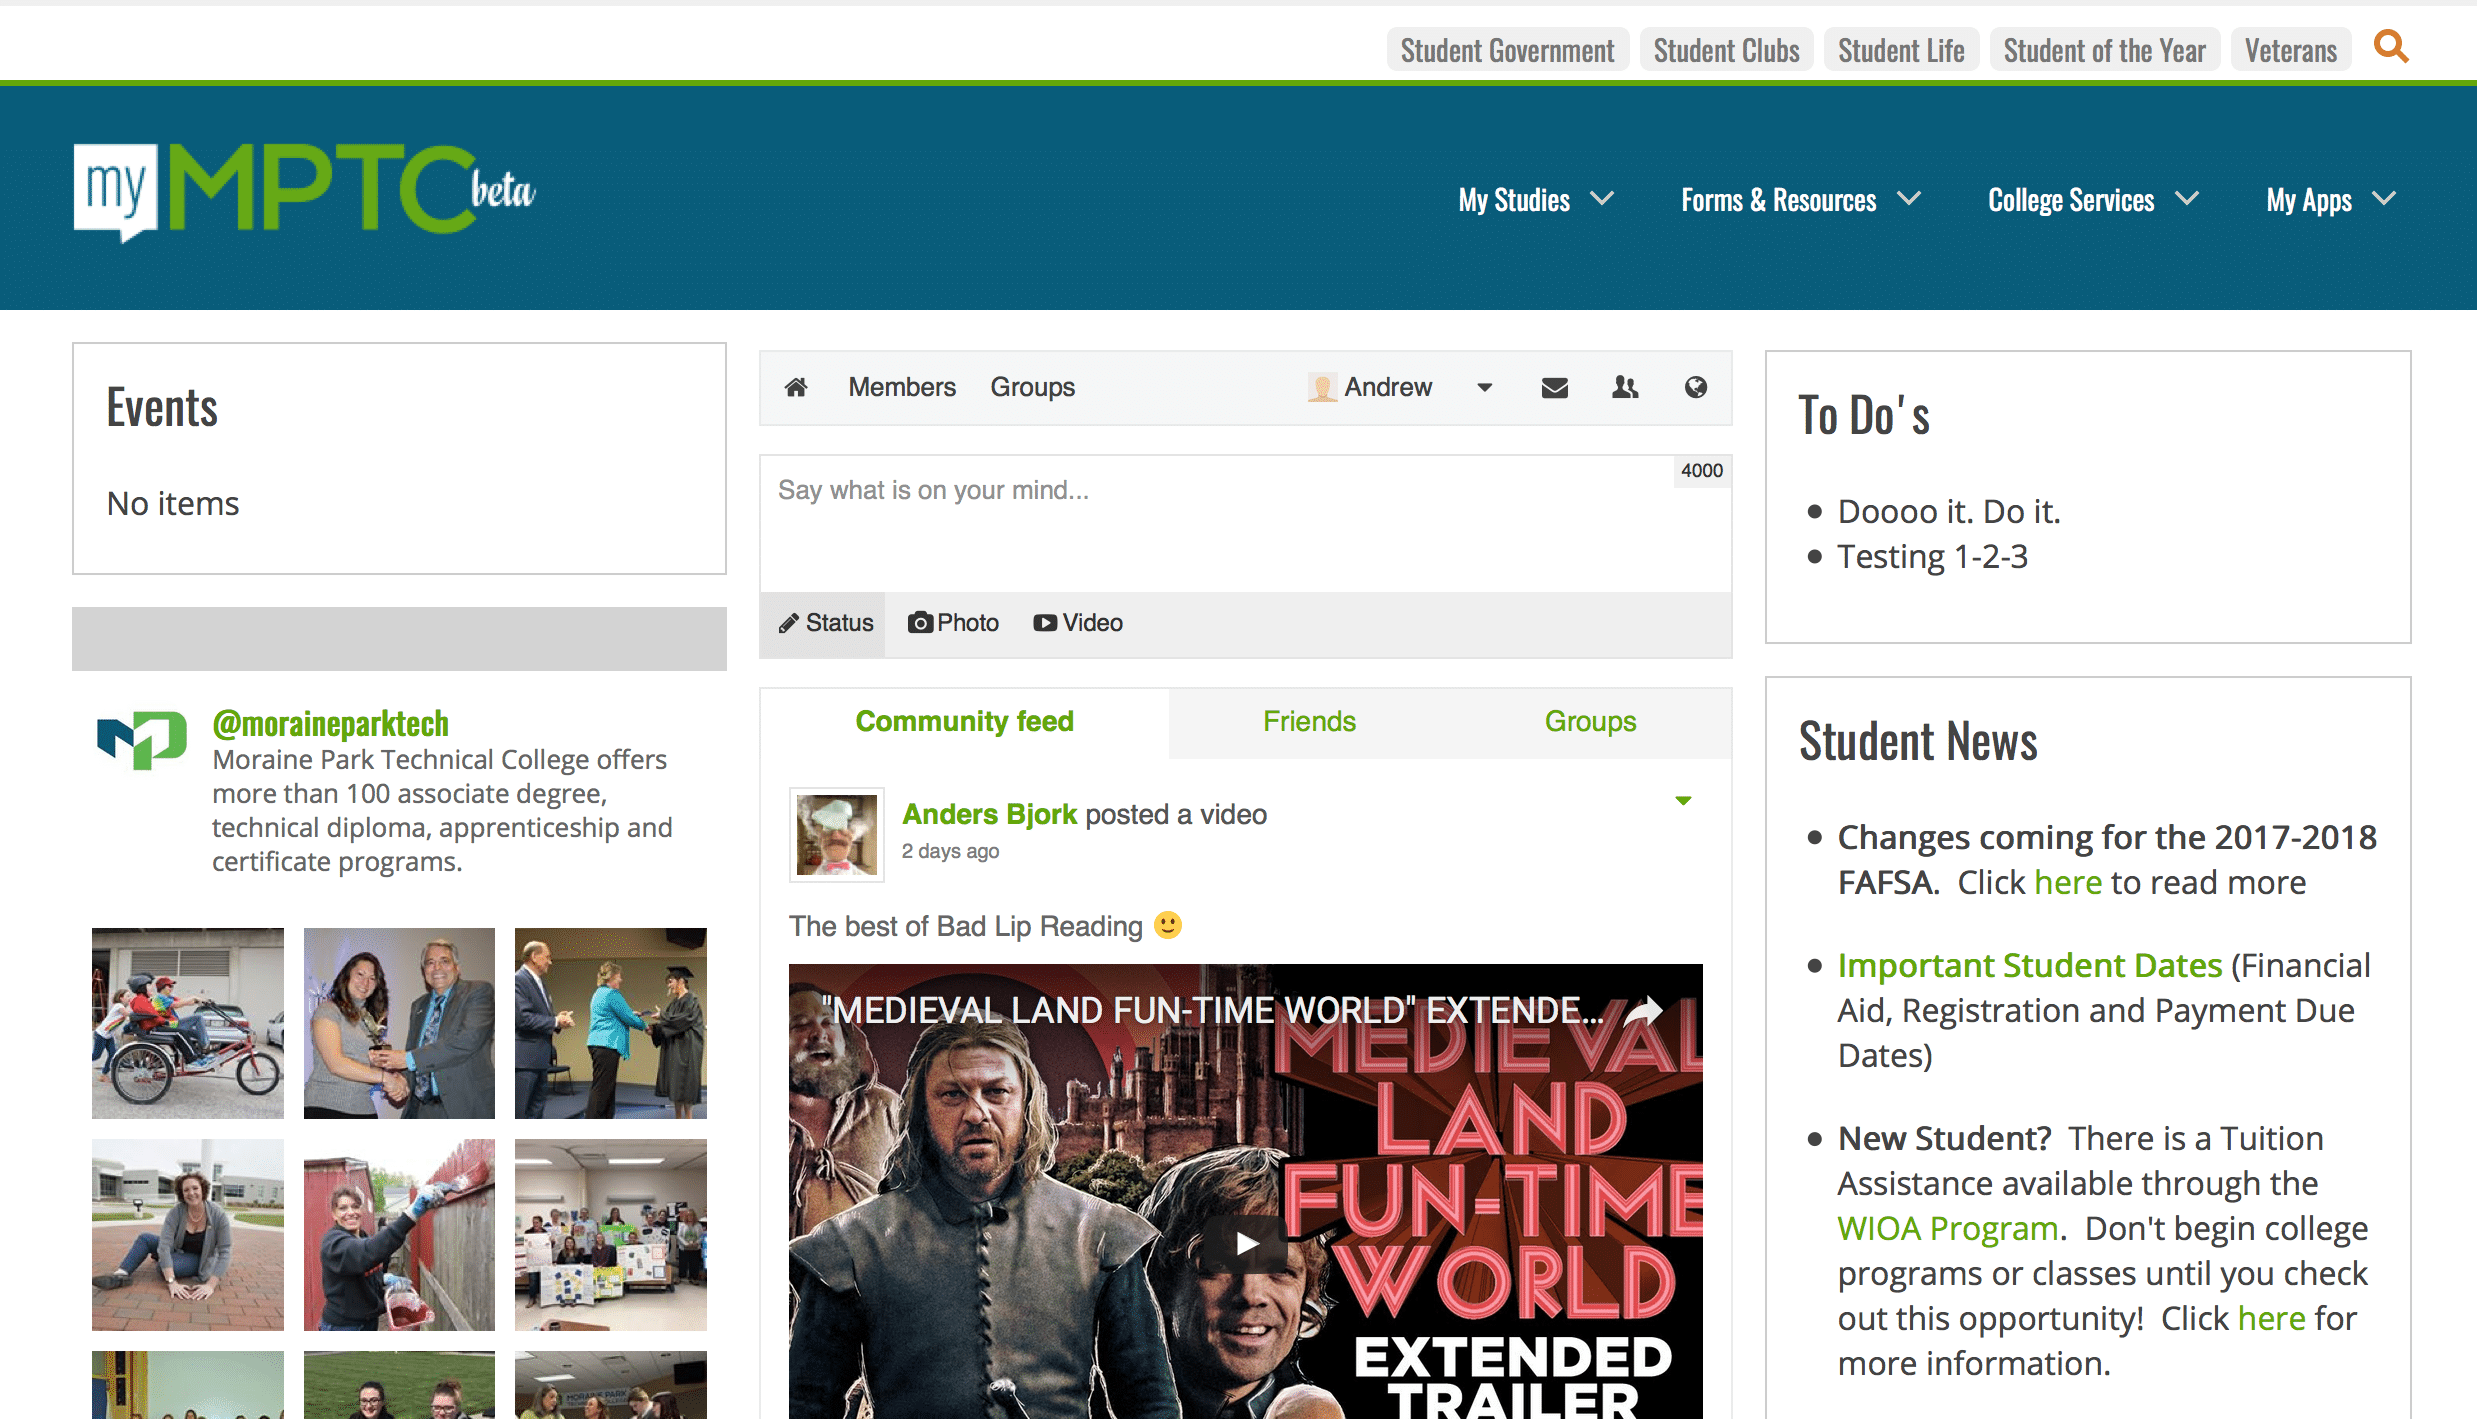 Screenshot showing features of myMPTC student portal